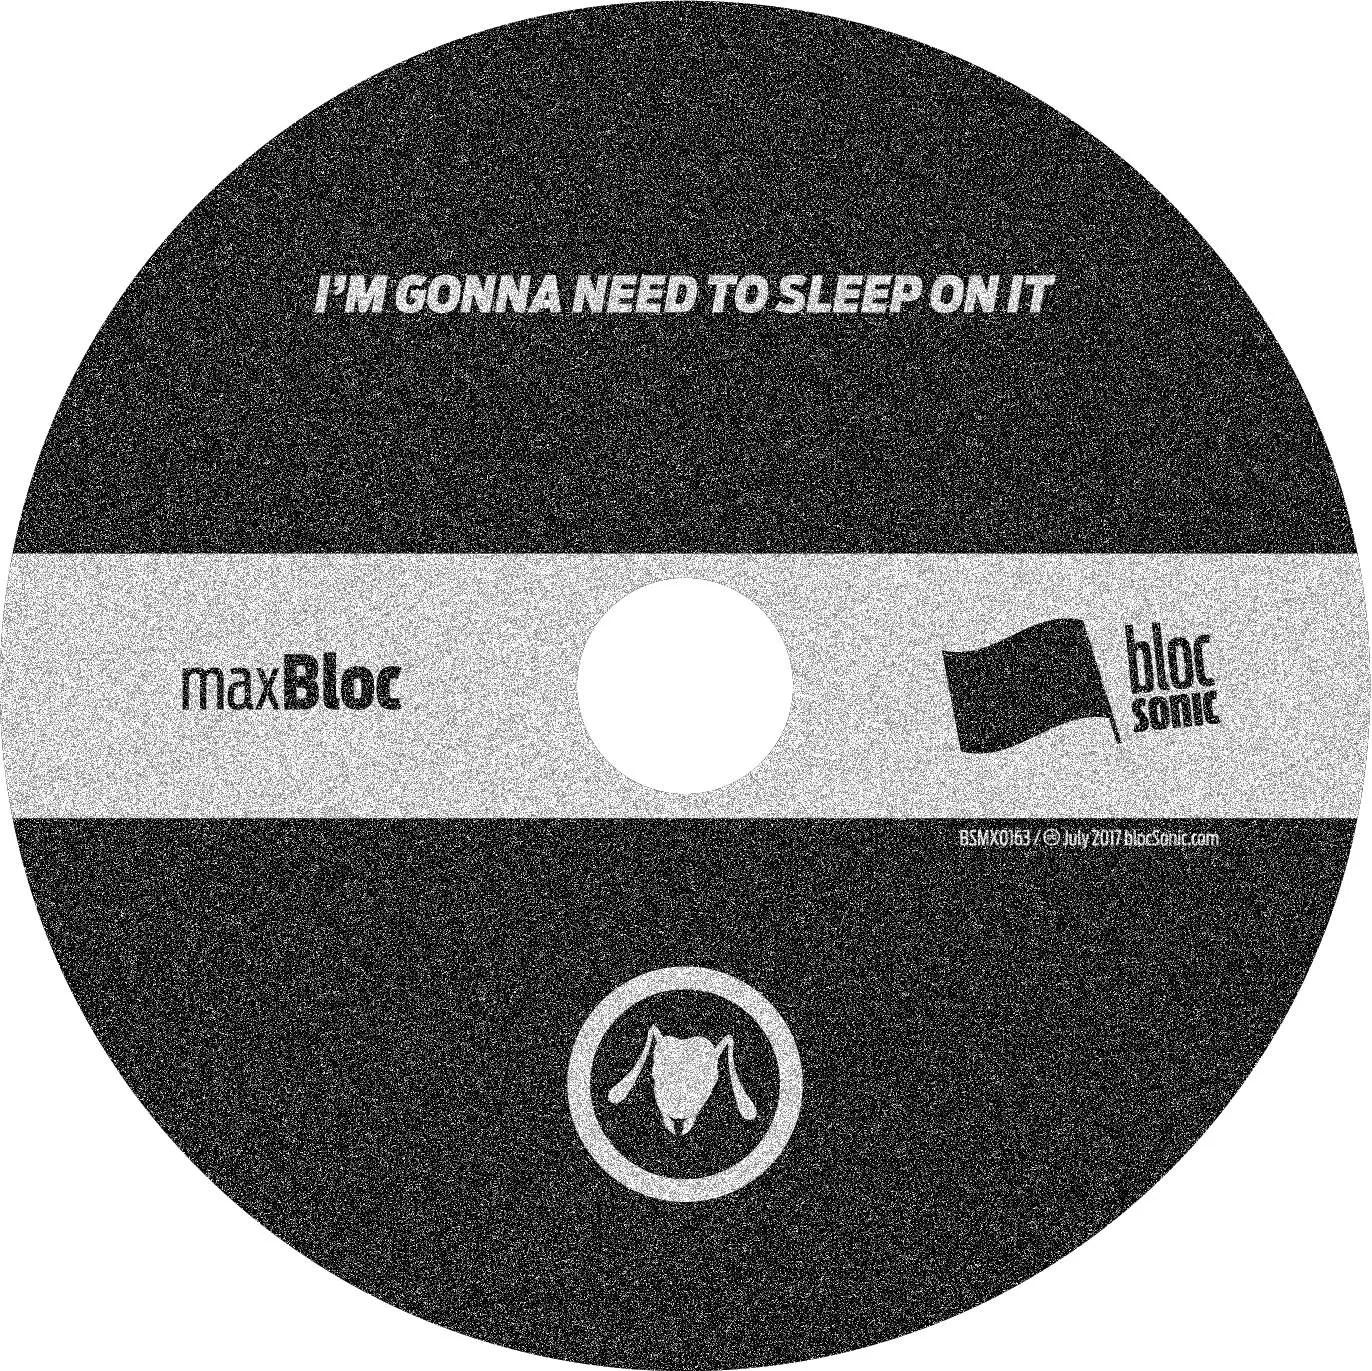 Album disc for “I'm Gonna Need To Sleep On It” by Ant The Symbol